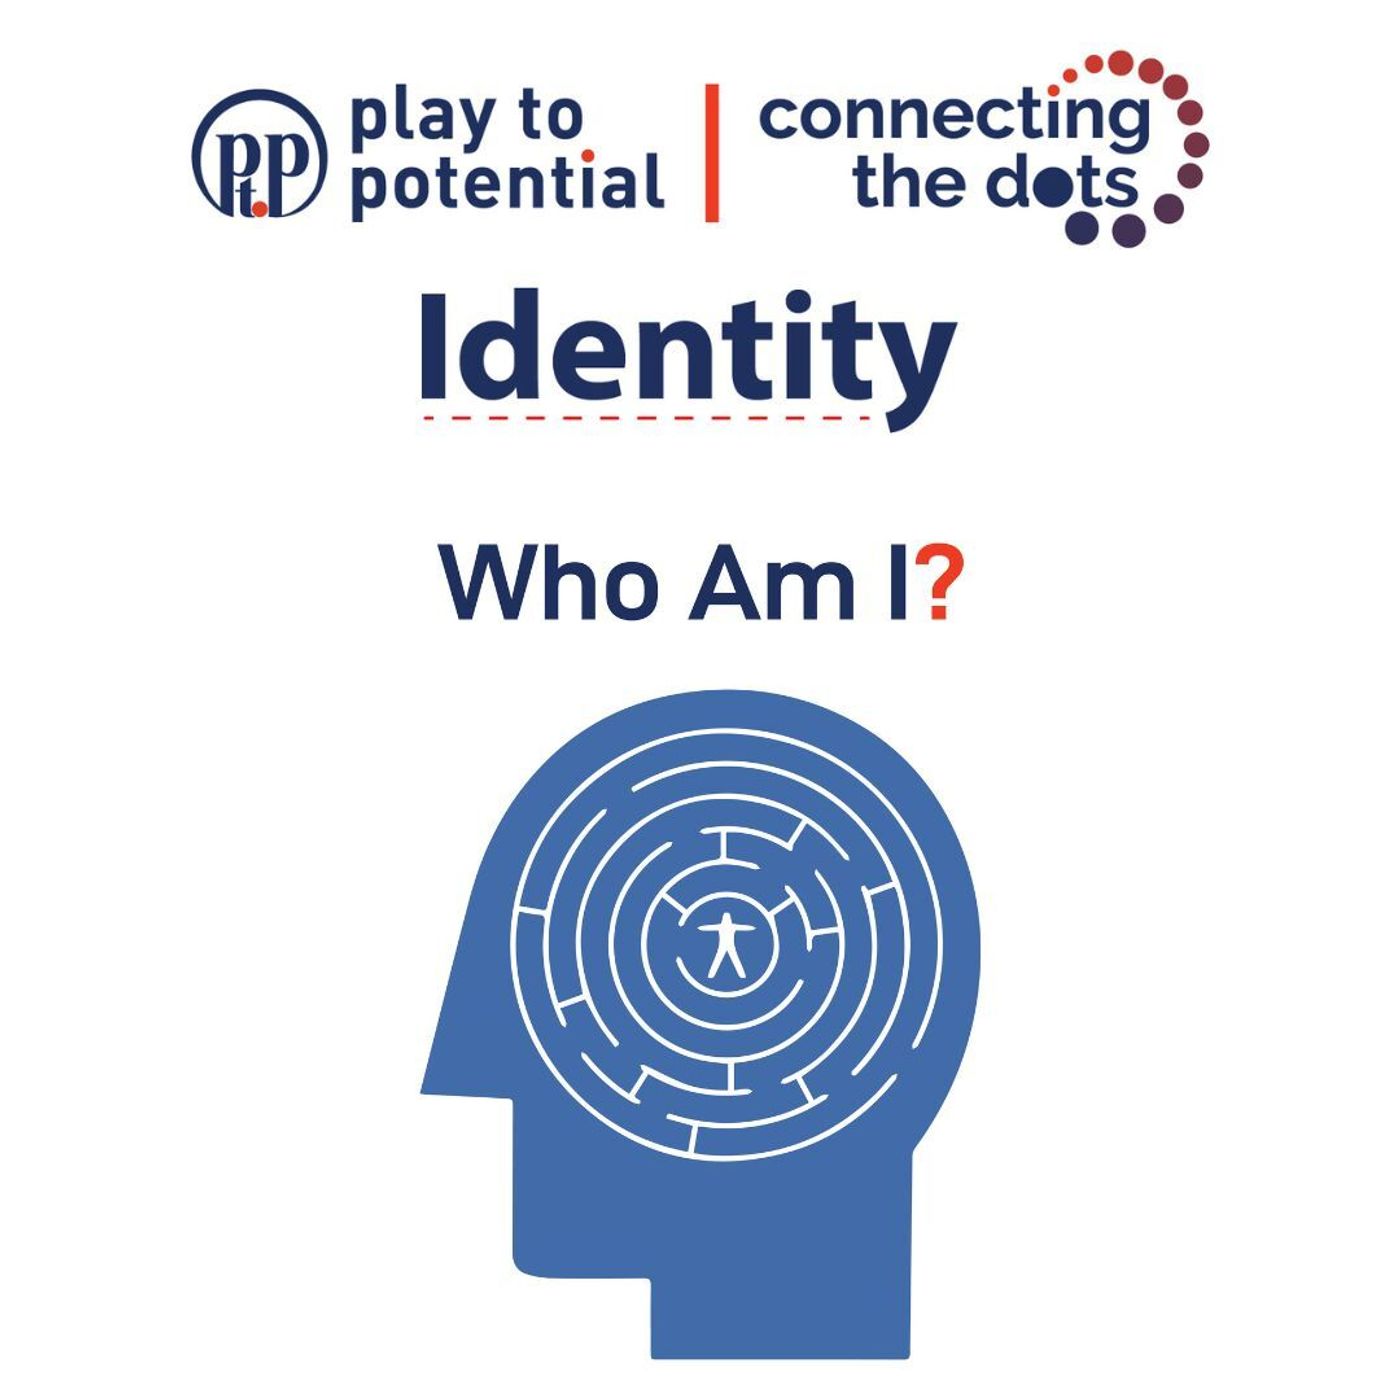 680: EP4: Connecting the Dots - Identity